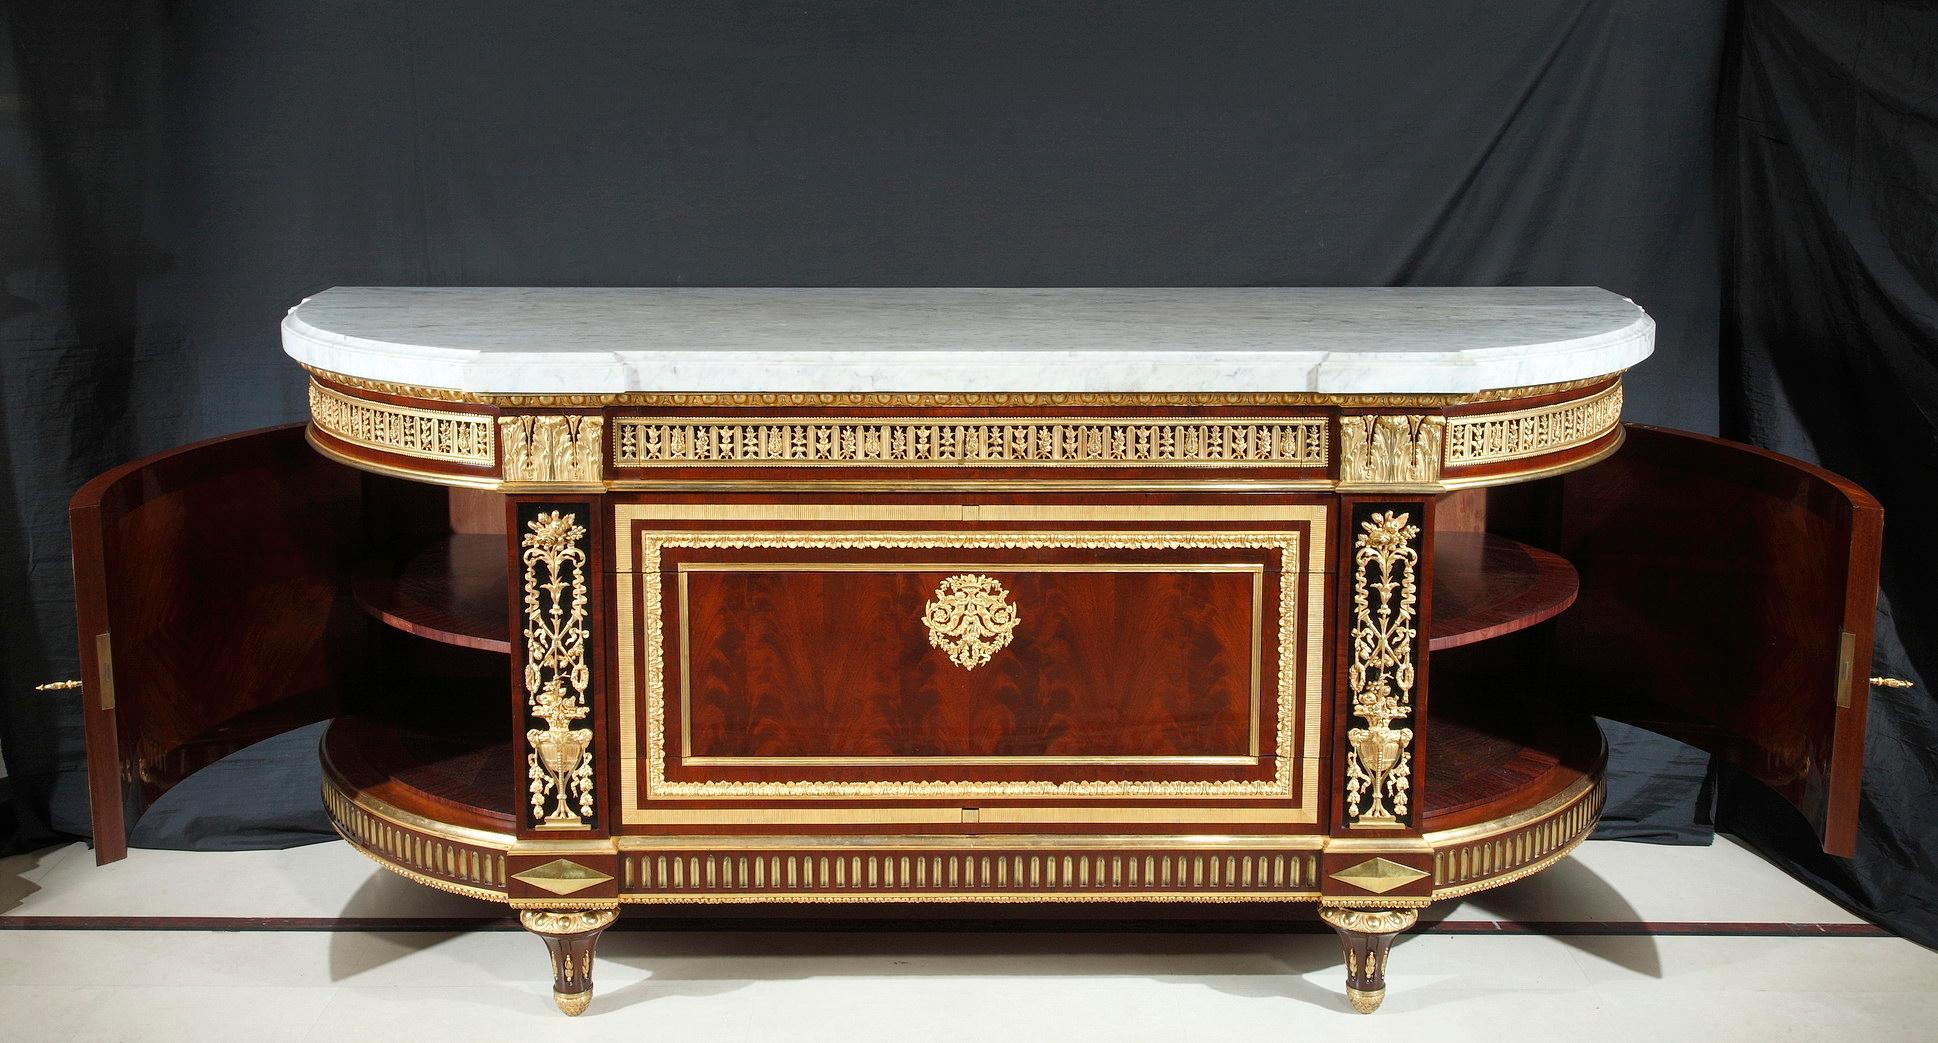 Very important chest-of-drawers in veneered and darkened wood. Rich and fine ornamentation made of Louis XVI style gilded and chiseled bronze representing egg-and-dart and foliage friezes. Opening by four drawers, one in the belt, two hidden with a